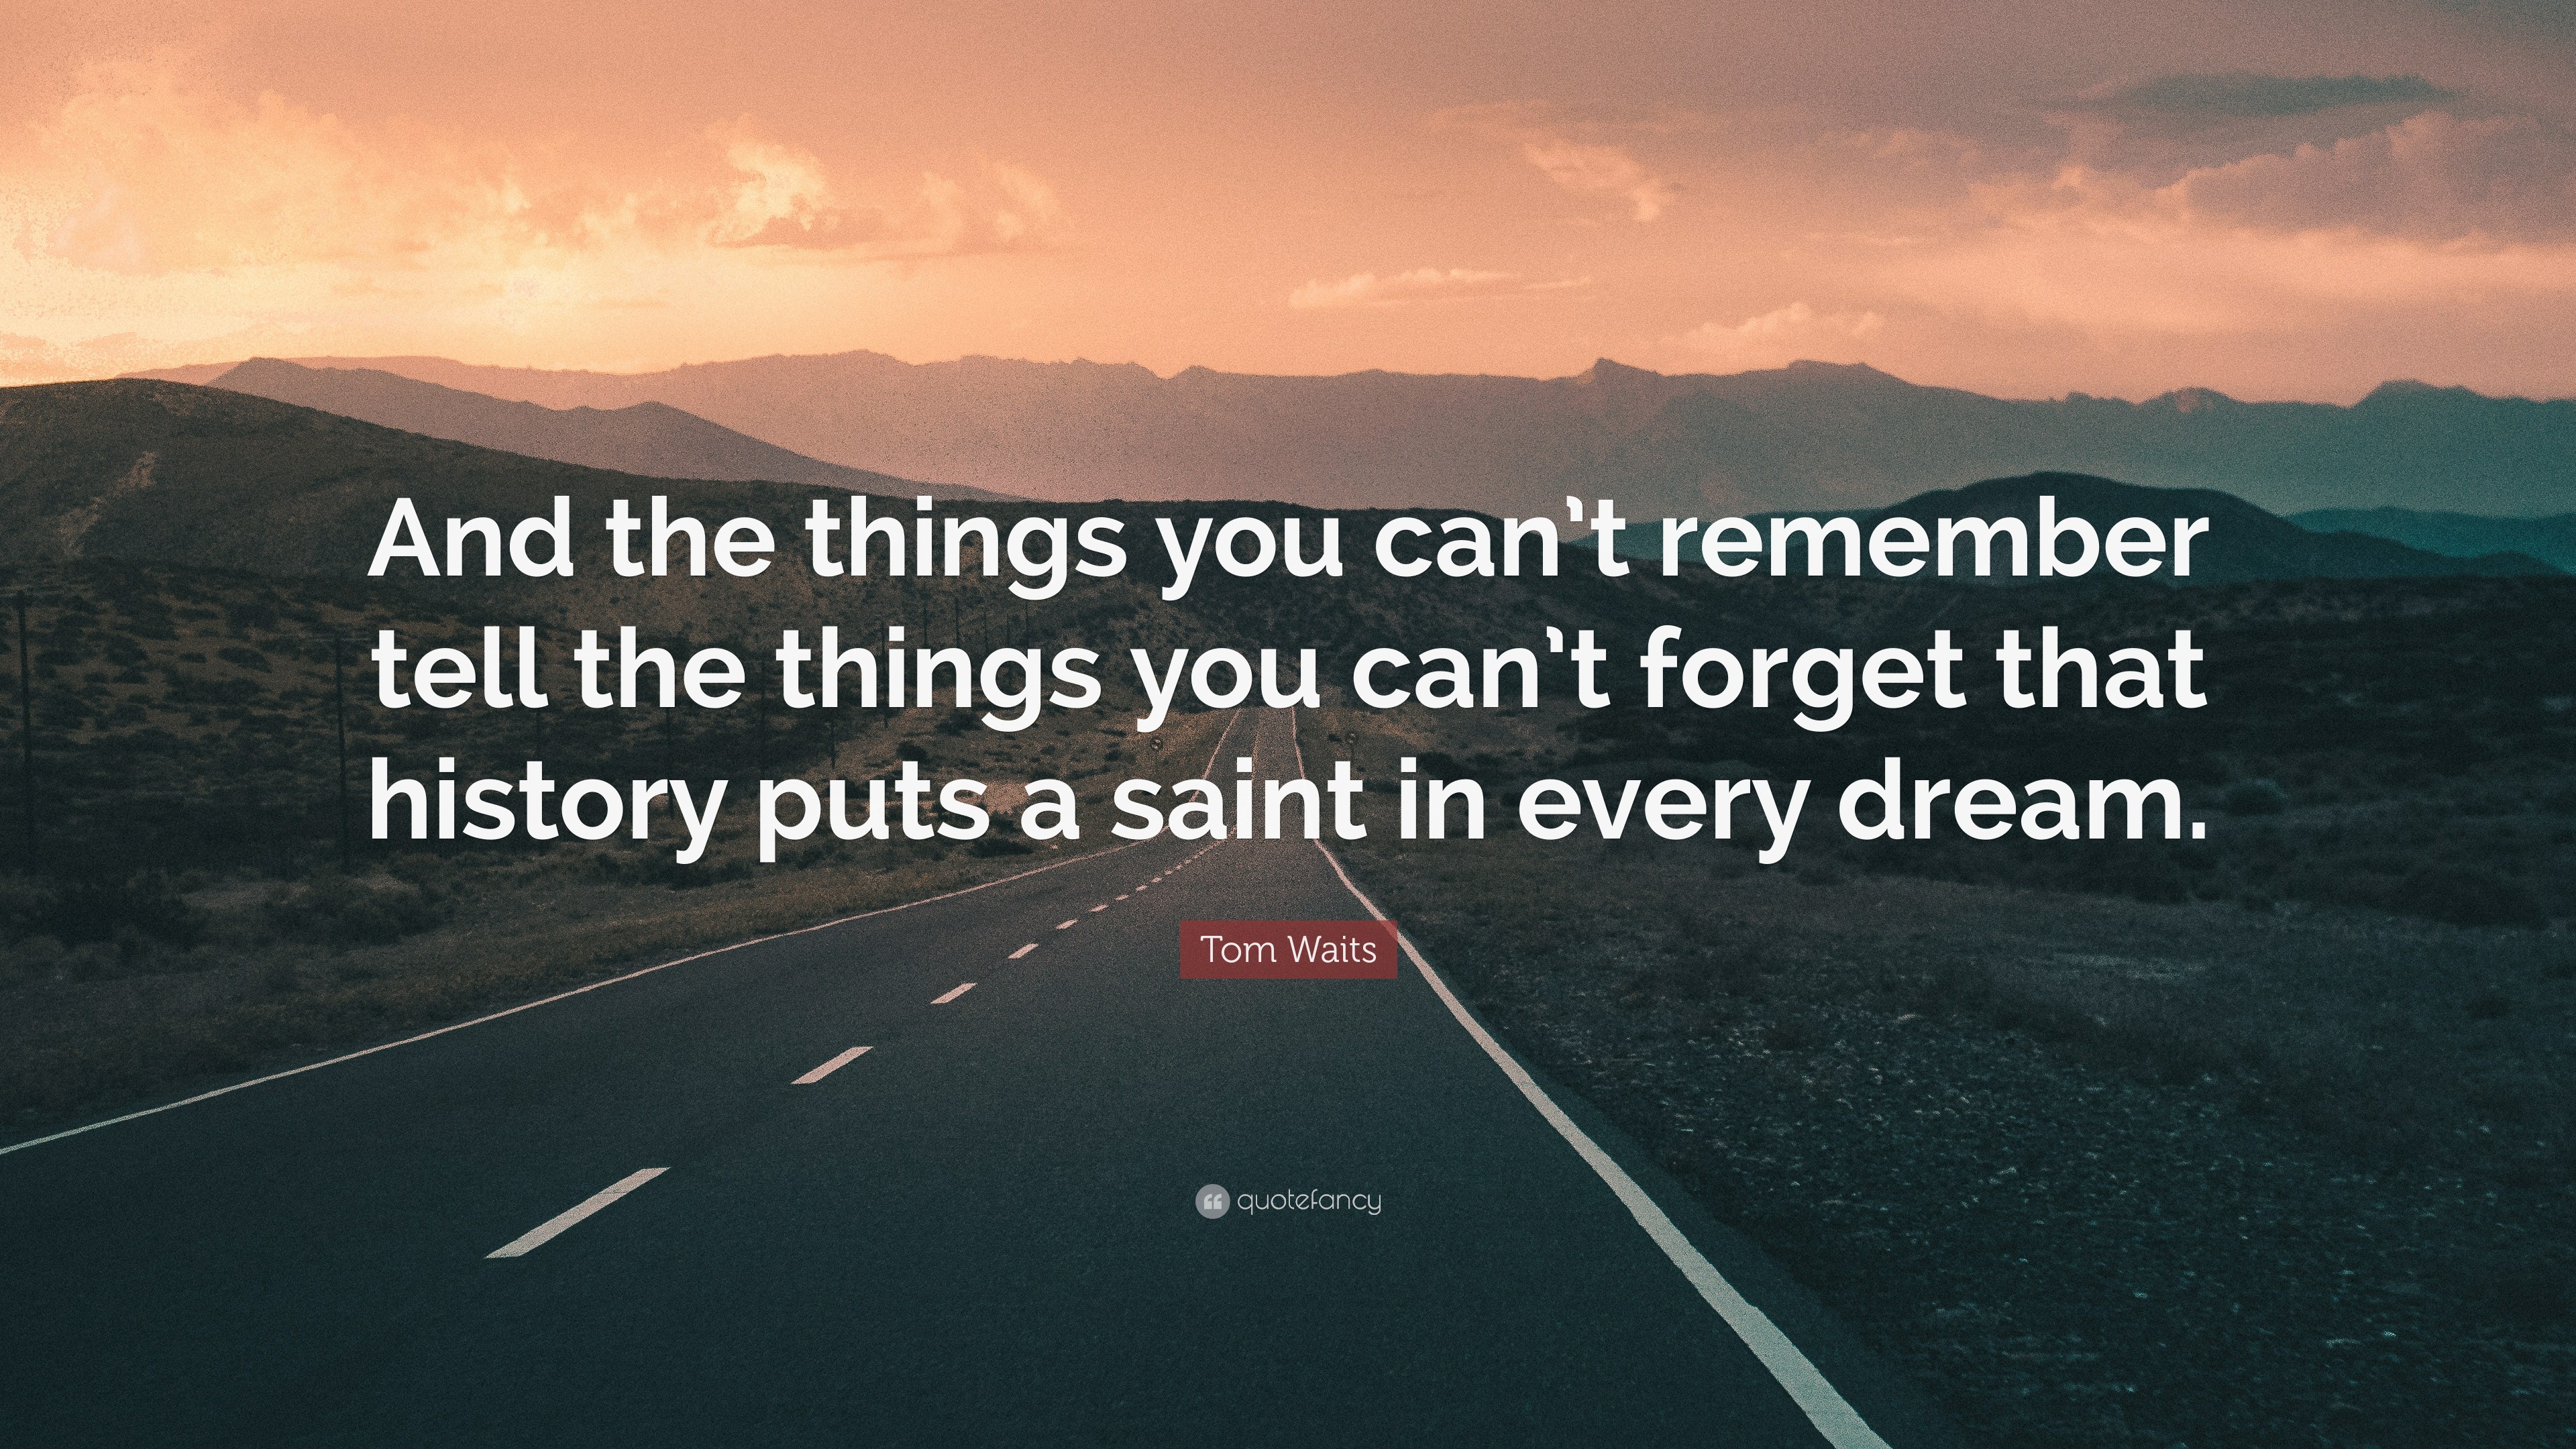 Tom Waits Quote And The Things You Can T Remember Tell The Things You Can T